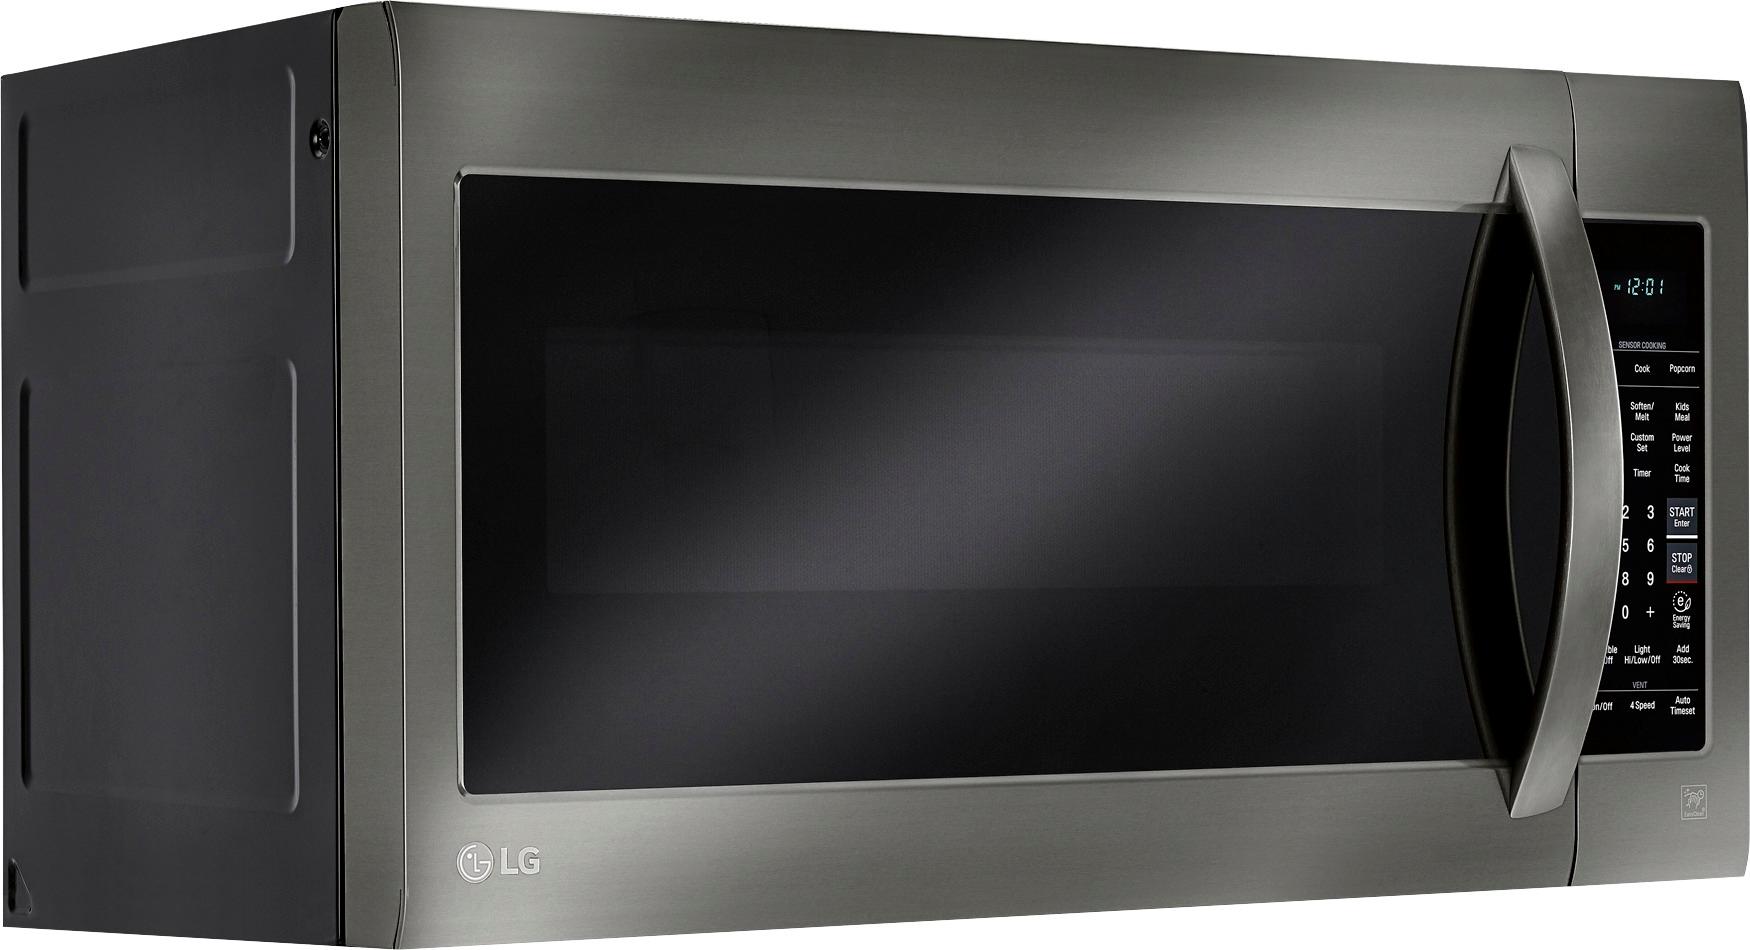 Angle View: Bertazzoni - Professional Series 1.6 Cu. Ft. Over-the-Range Microwave with Sensor Cooking - Stainless steel